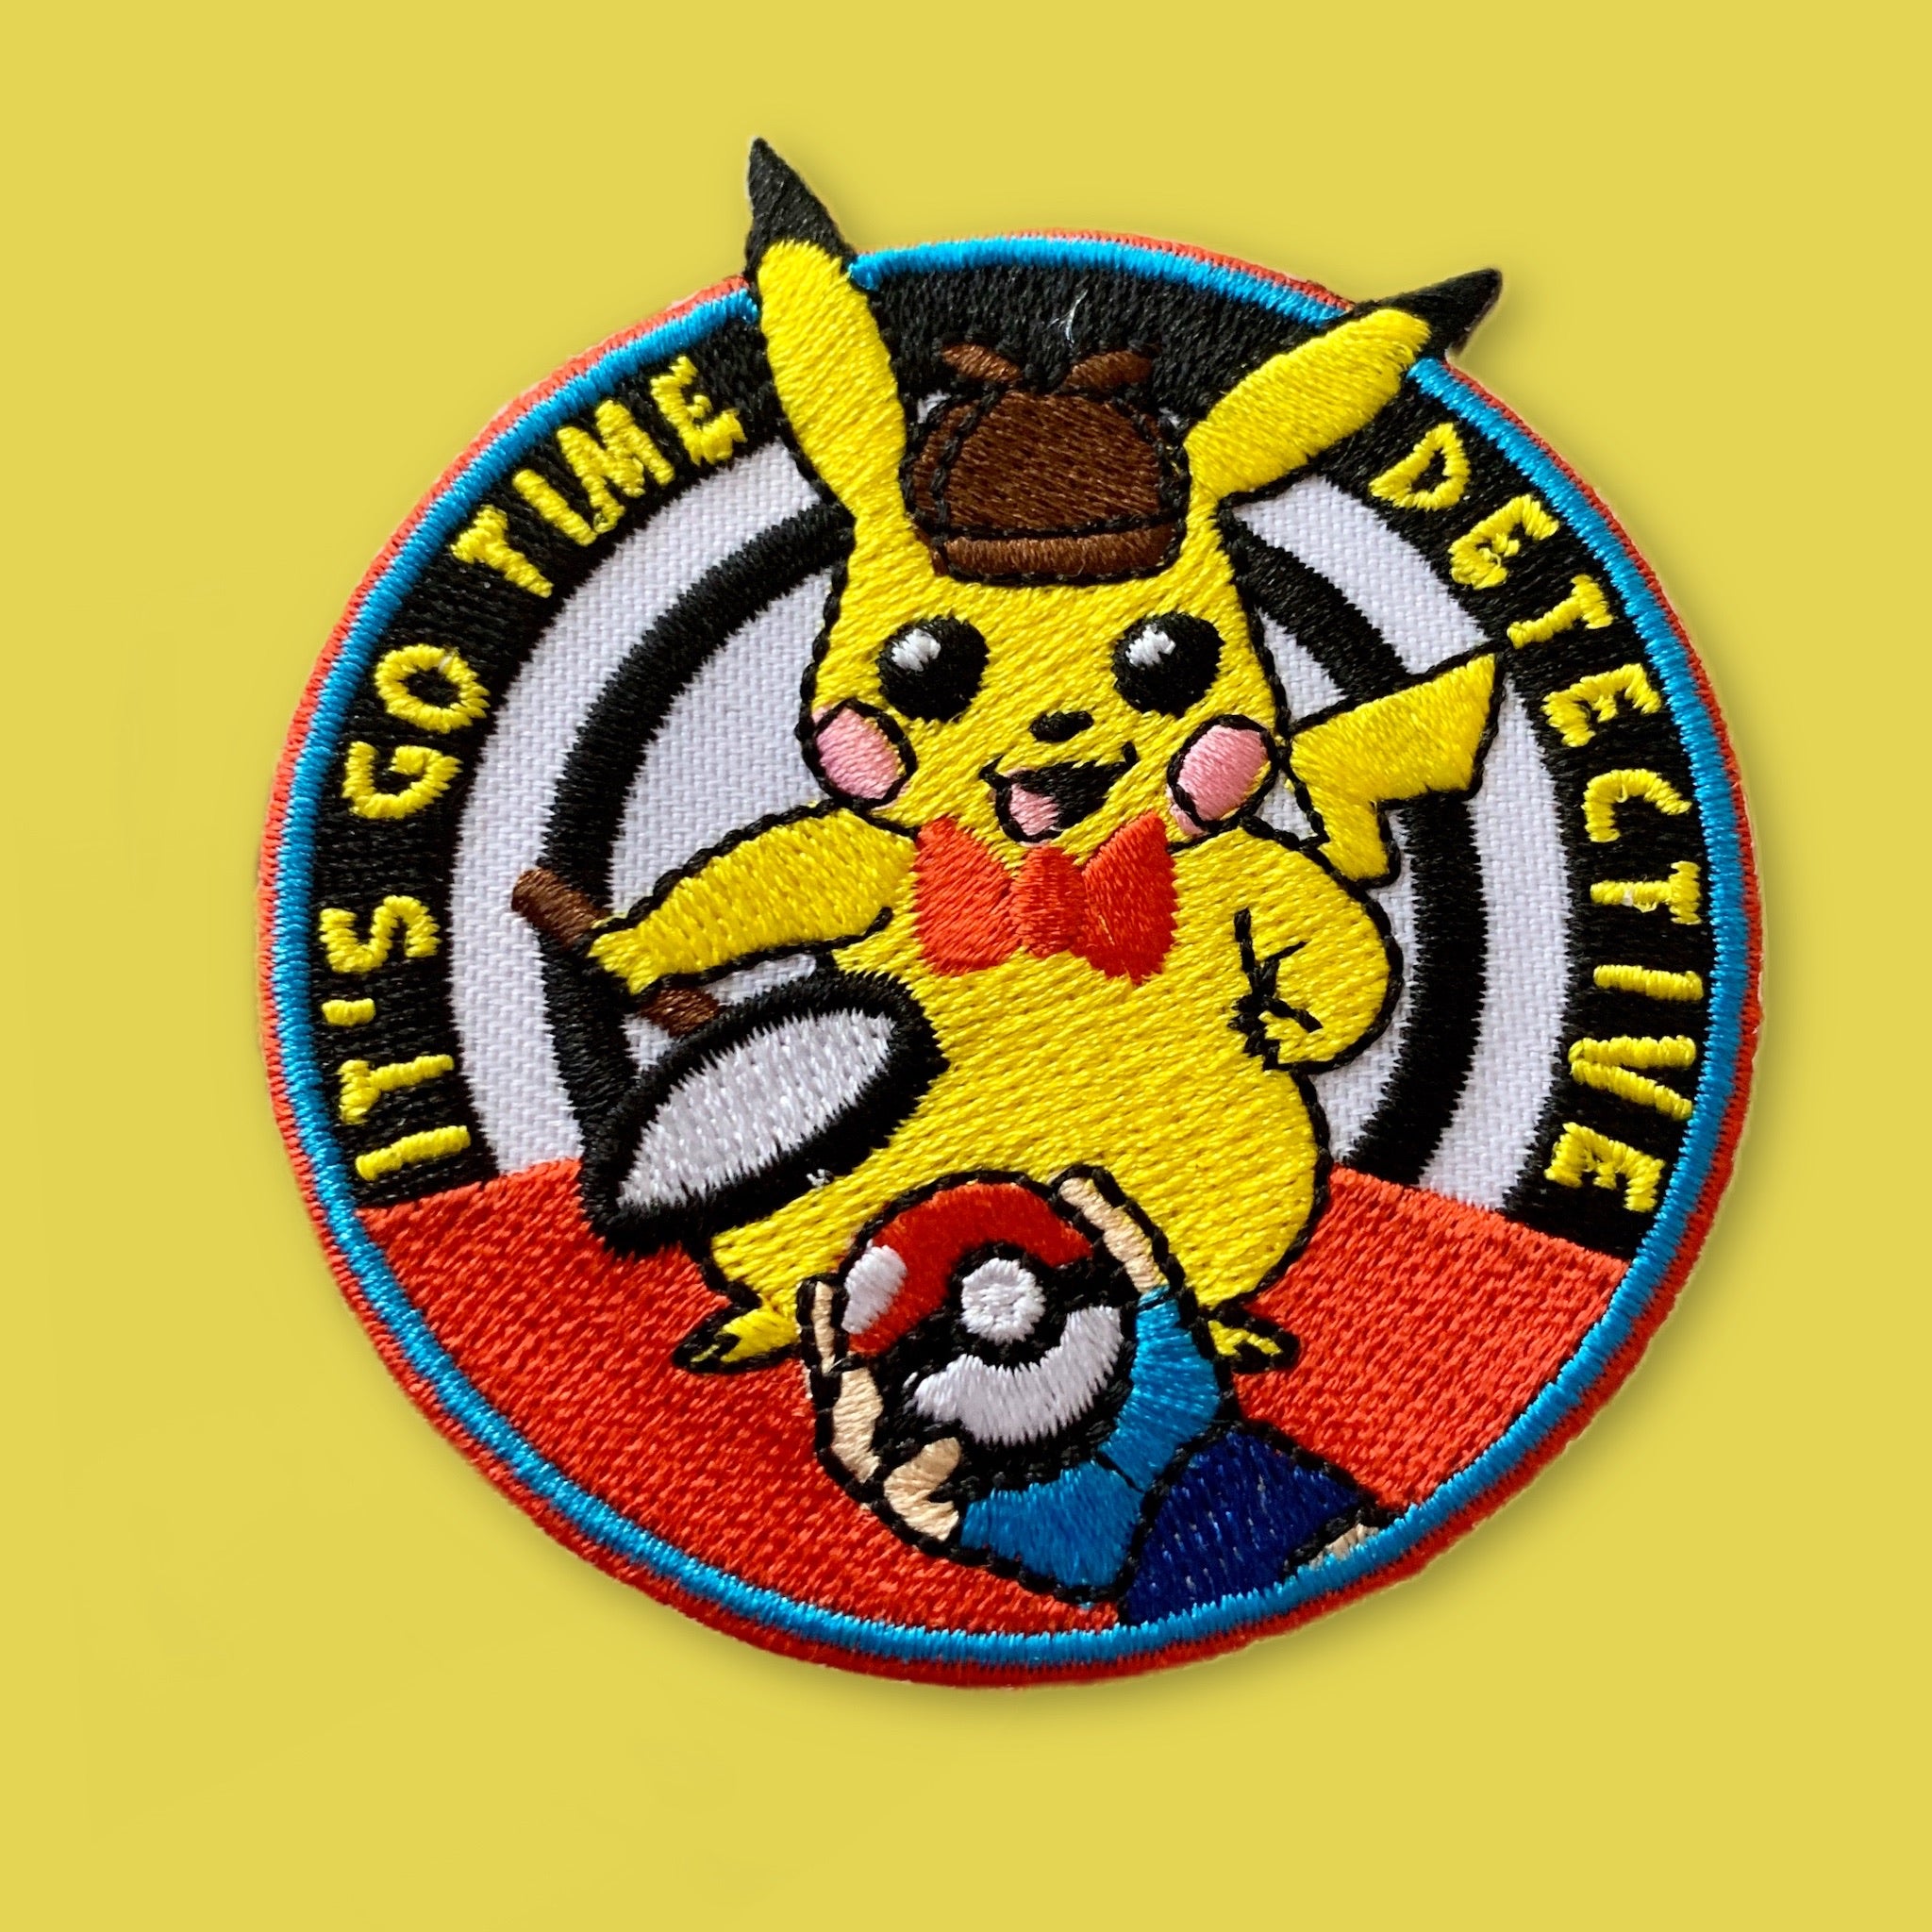 It's Go Time Detective – Mad About Patches